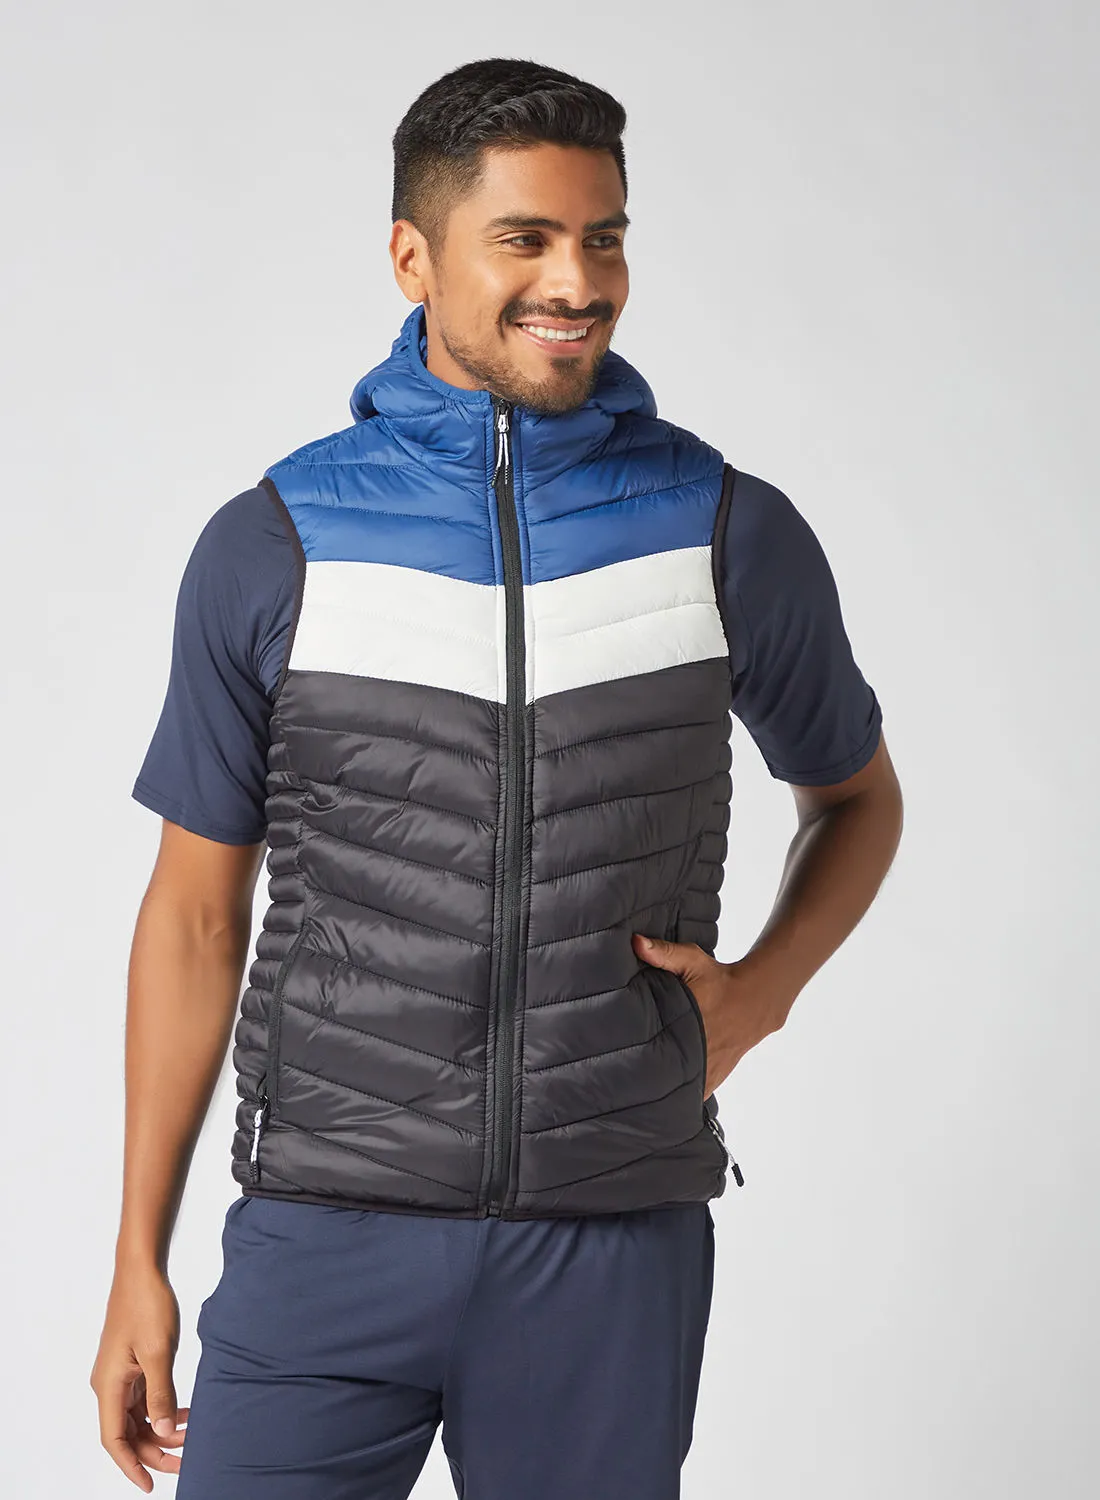 Athletiq Men's Casual Hooded And Side Pockets Detail Stripped Puffer Vest Jacket Black/White/Blue